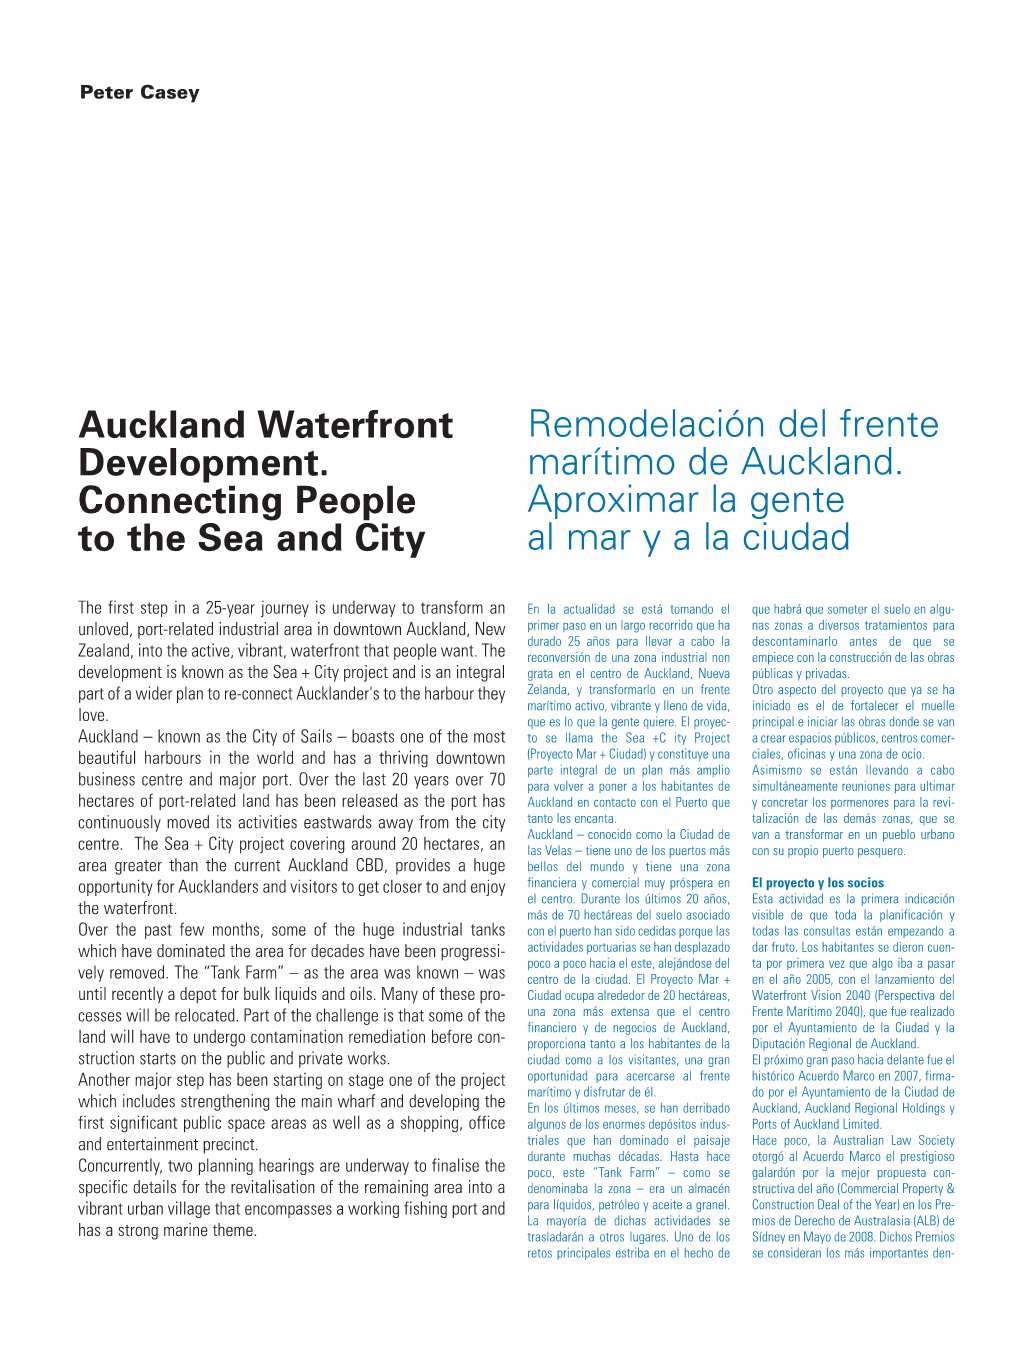 Auckland Waterfront Development. Connecting People to the Sea And